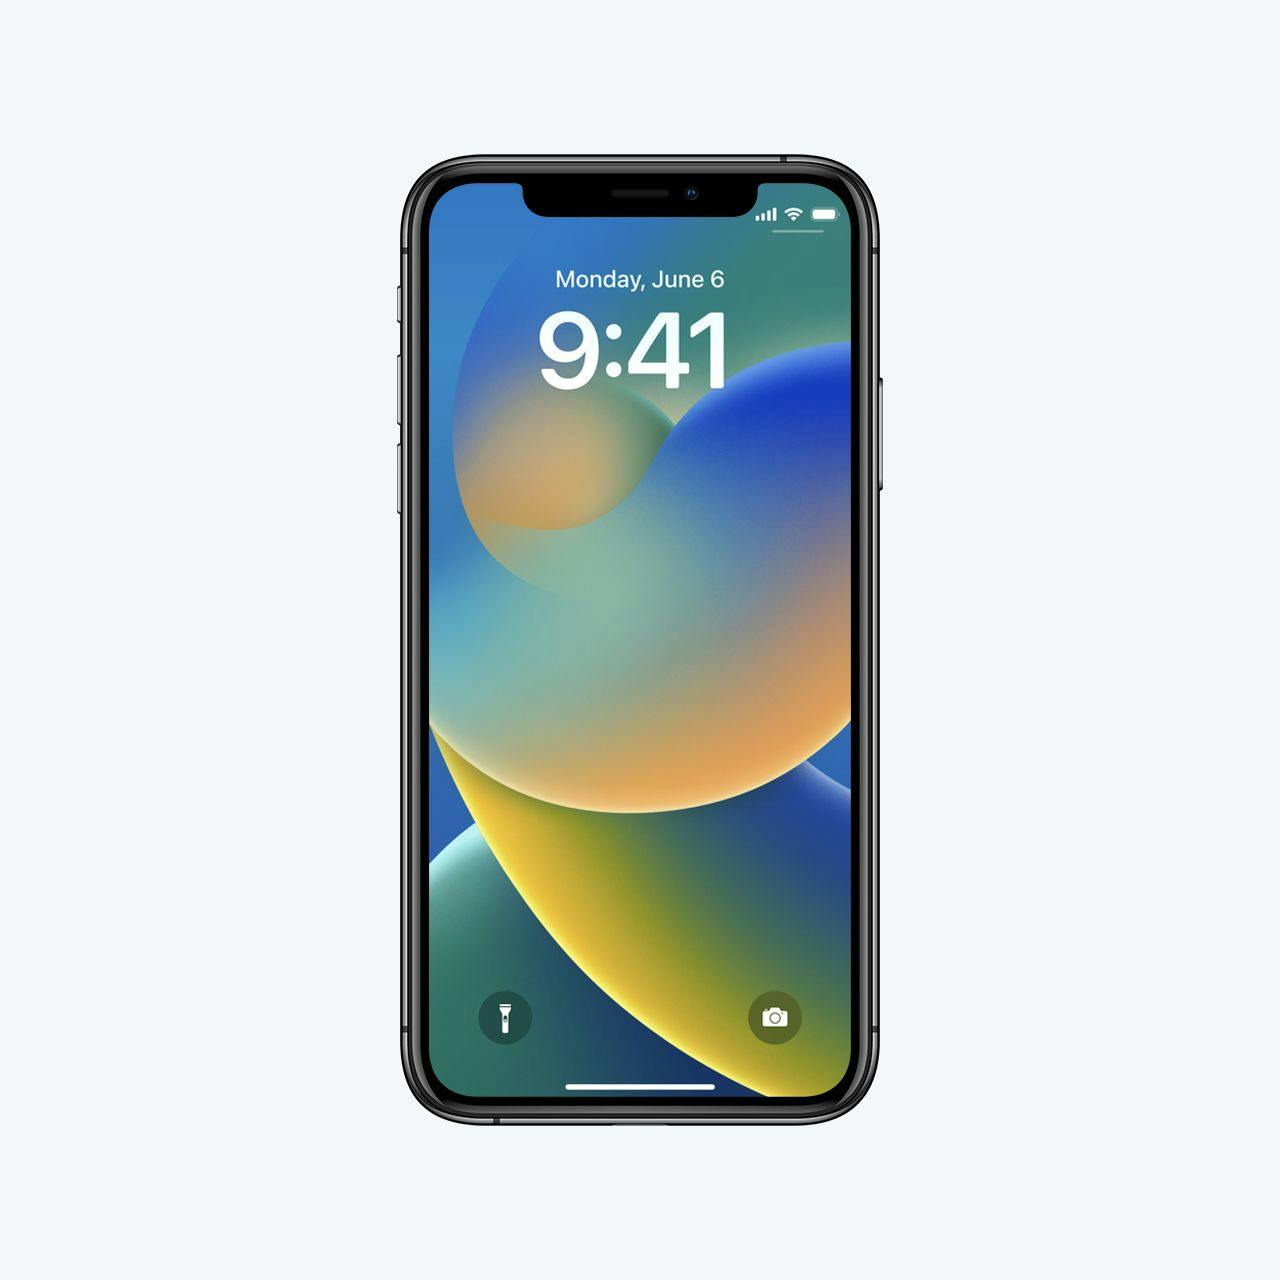 Image of iPhone X.